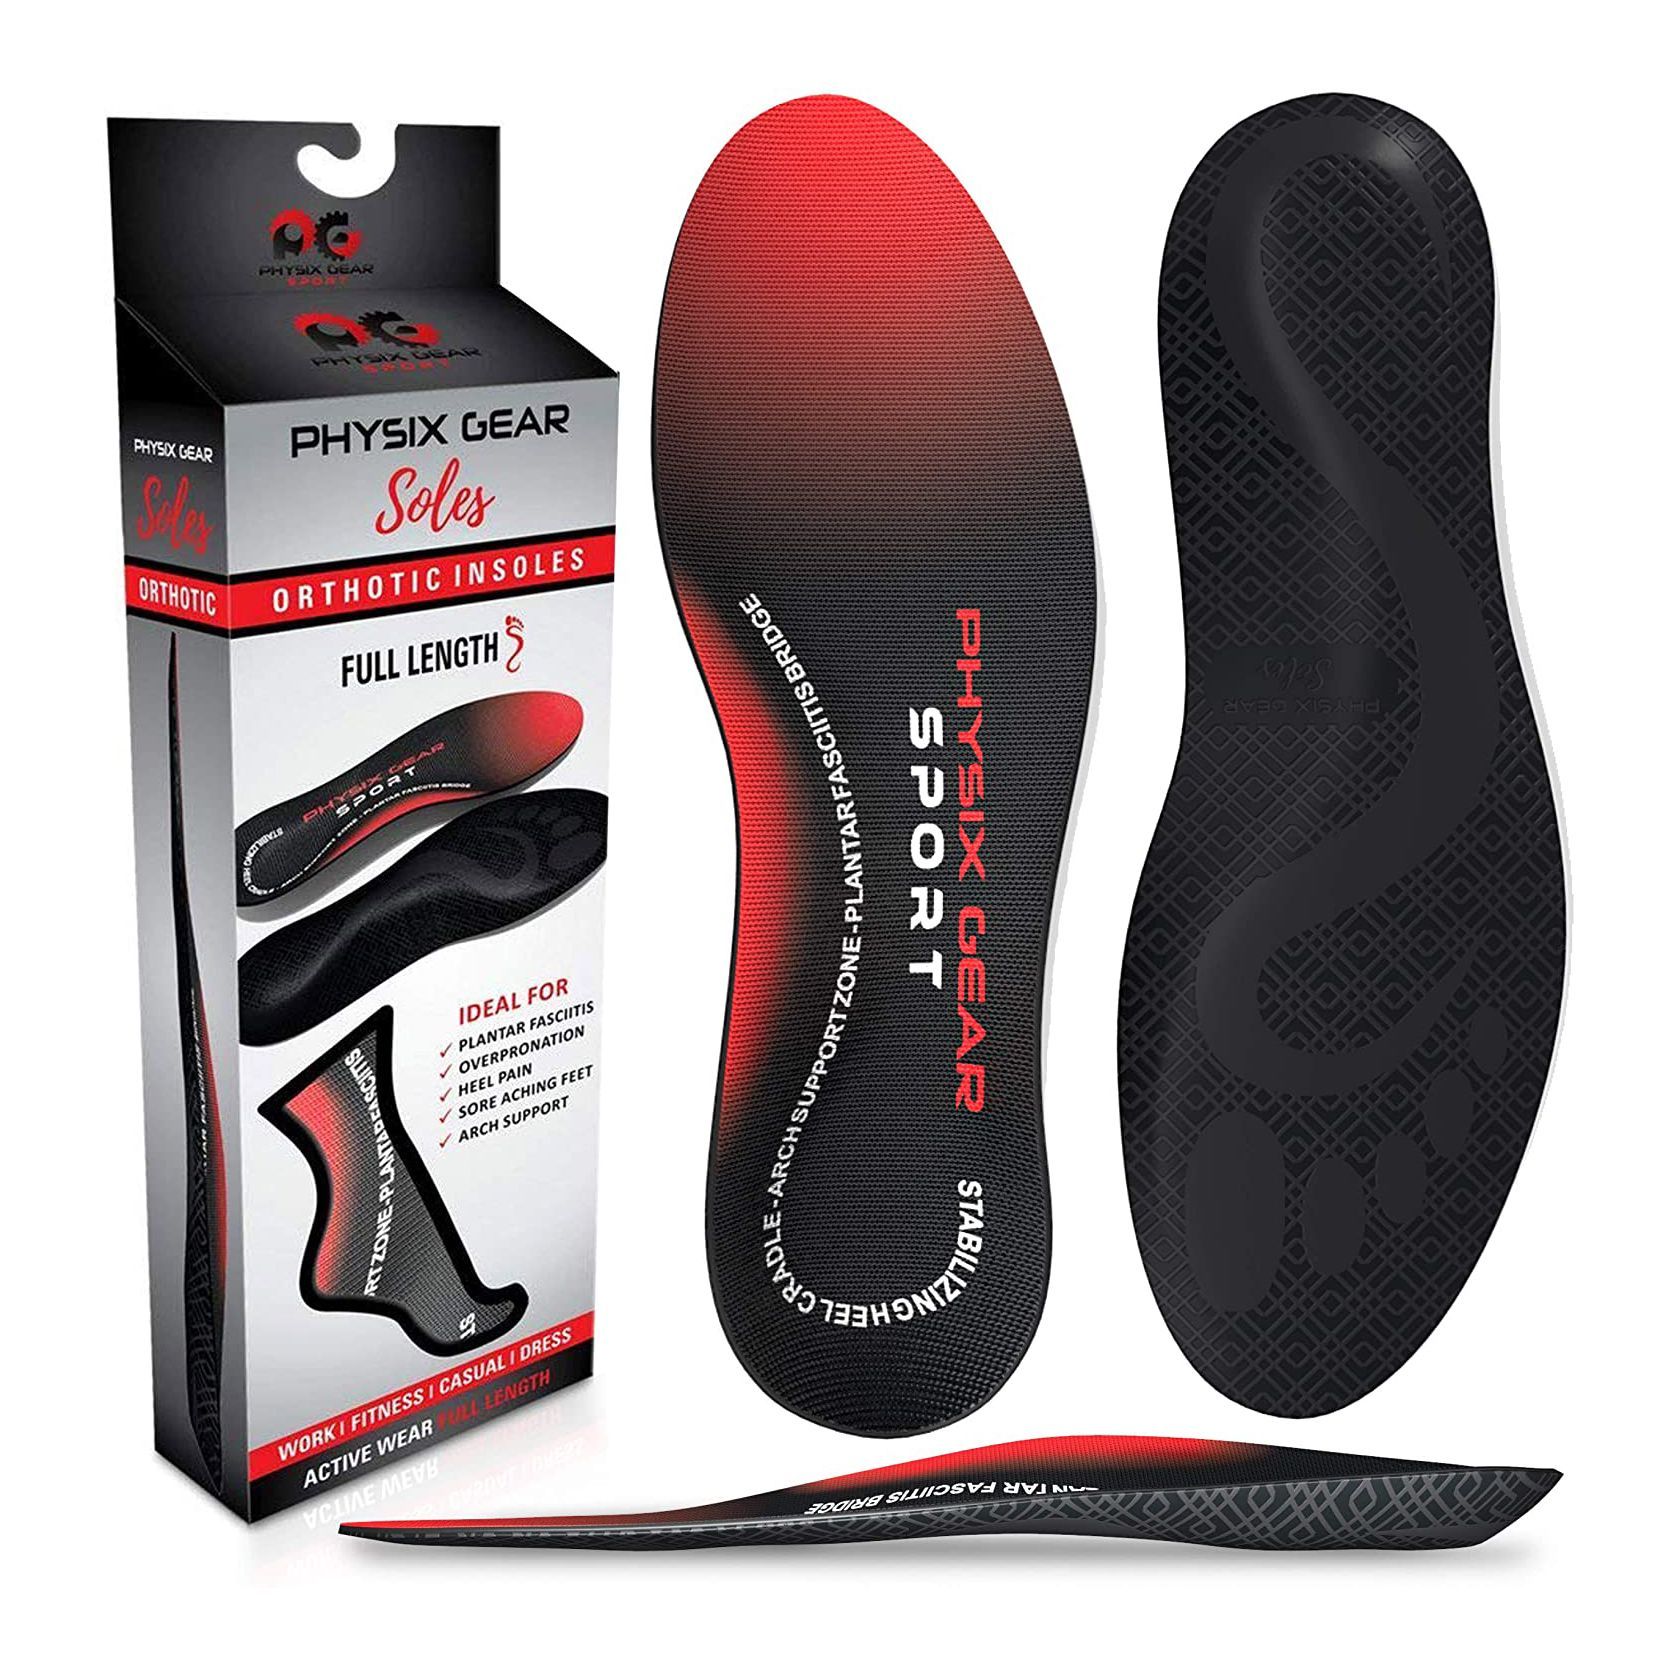 Foot Pain Plantar Fasciitis Feet Insoles Heavy Duty Cushion Insoles for Any Age Arch Supports Orthotics Inserts Relieve Flat Feet High Arch 